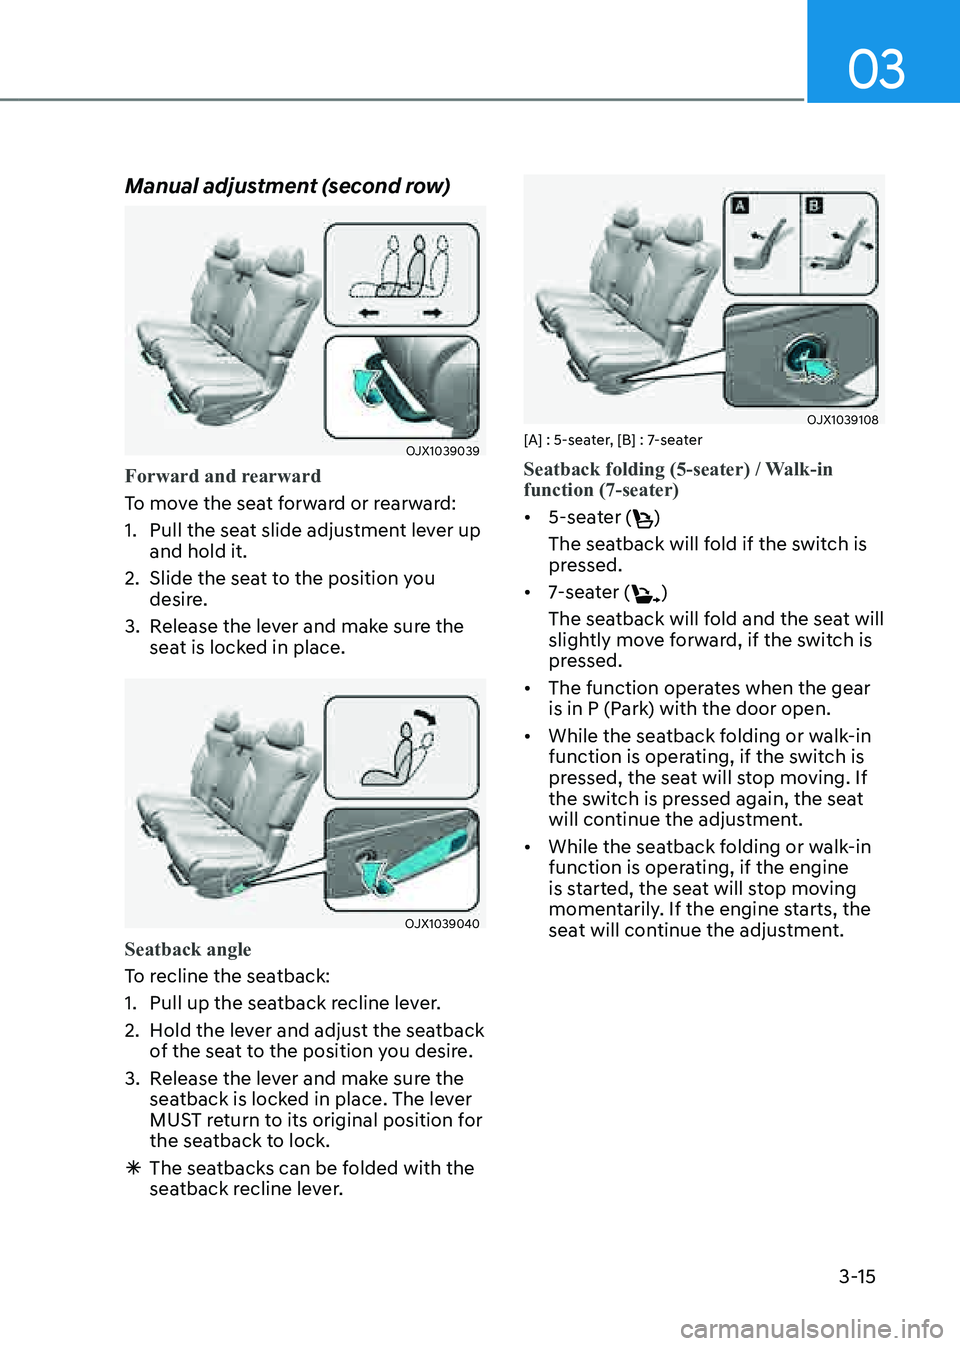 GENESIS GV80 2021  Owners Manual 03
3-15
Manual adjustment (second row)
OJX1039039OJX1039039
Forward and rearward
To move the seat forward or rearward:
1. Pull the seat slide adjustment lever up 
and hold it.
2. Slide the seat to the